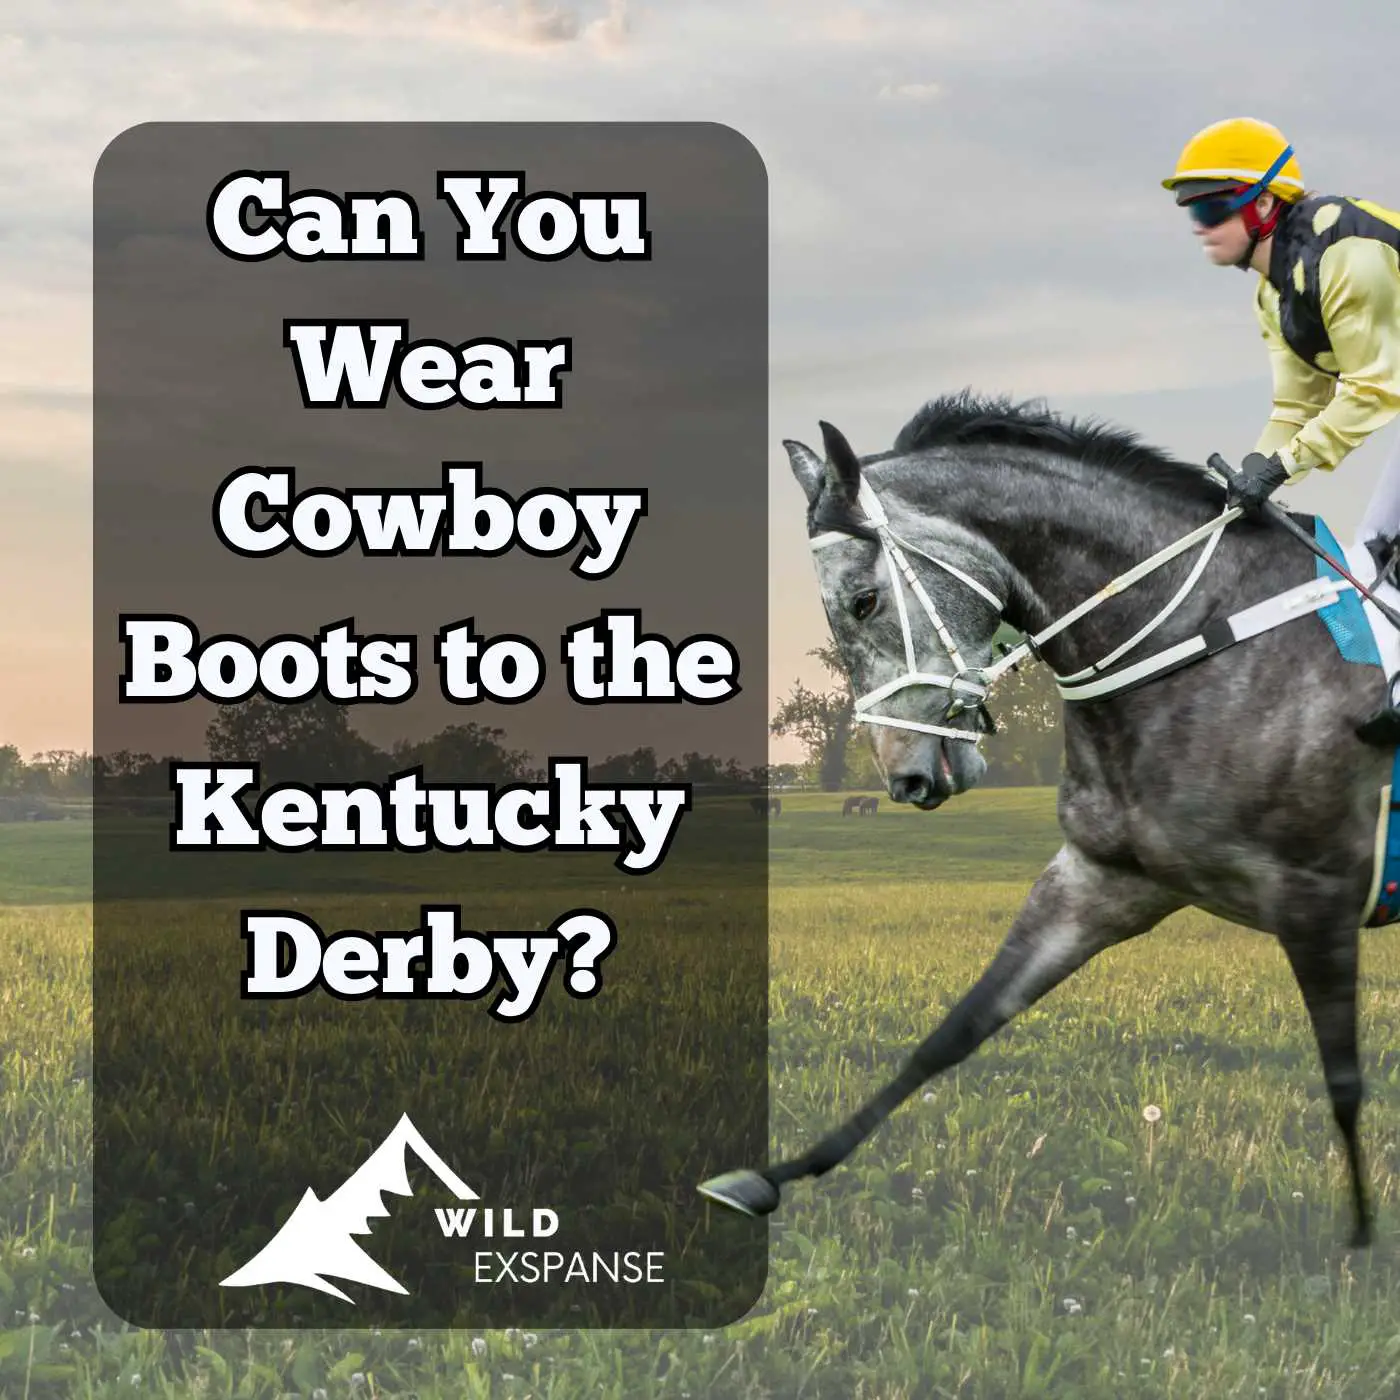 Can You Wear Cowboy Boots to the Kentucky Derby?